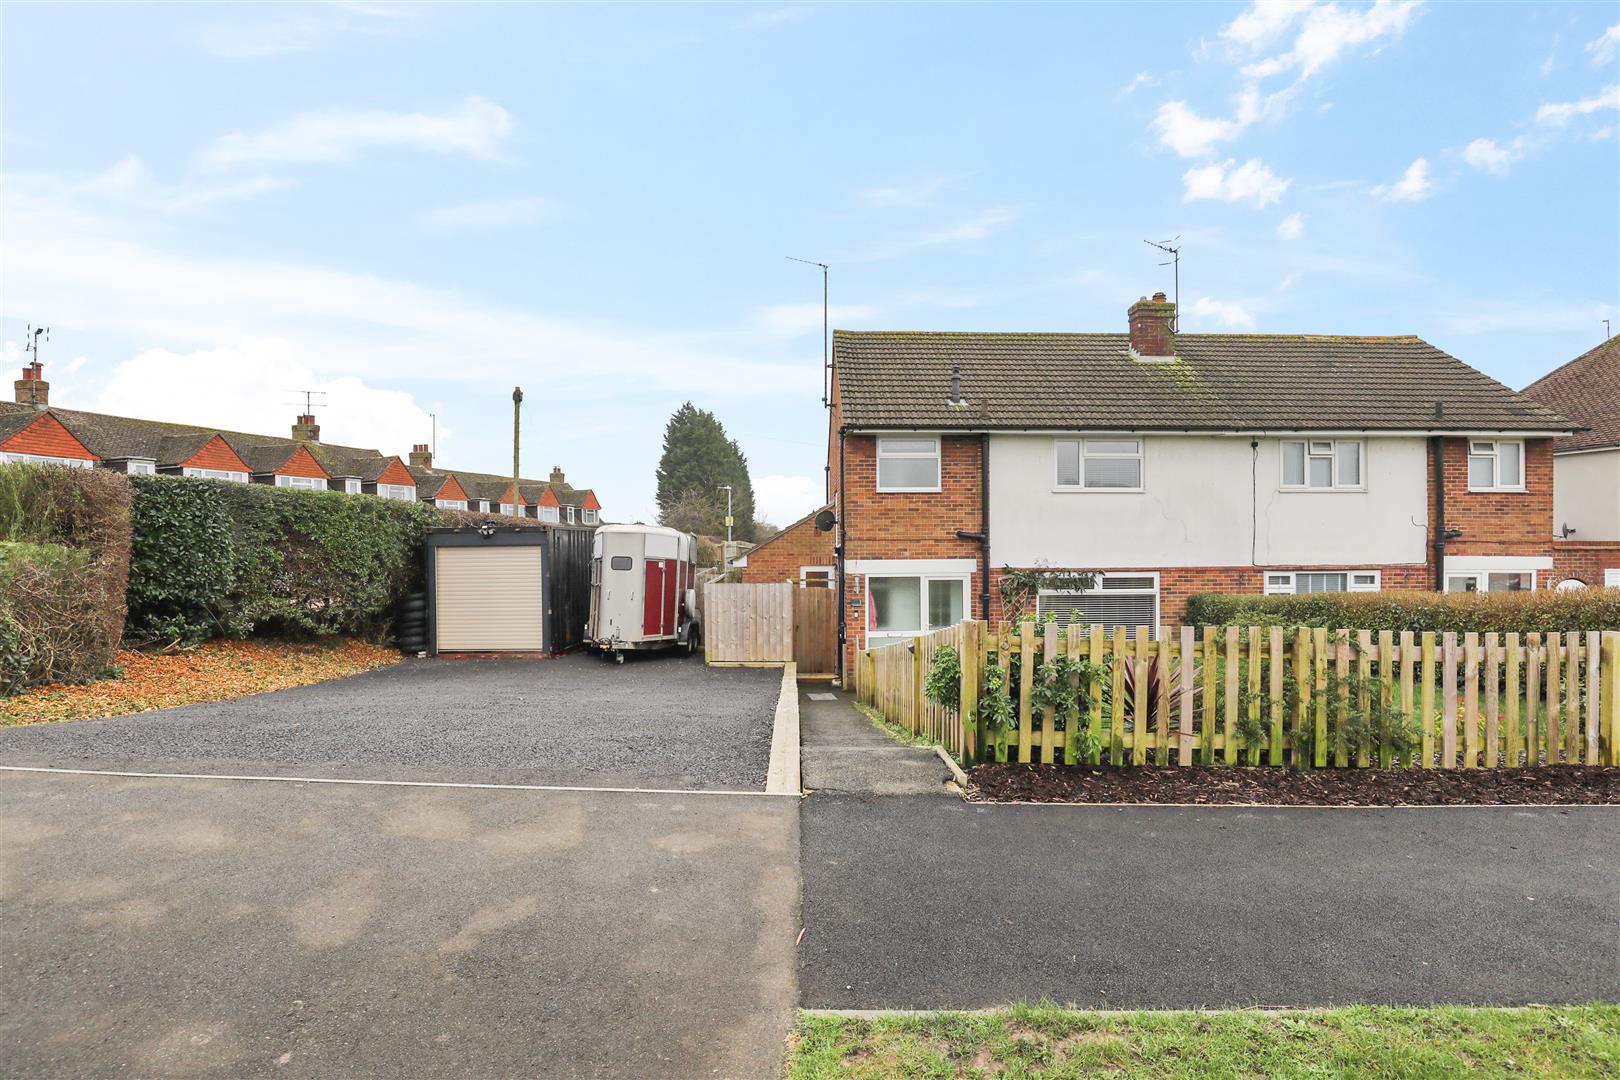 3 bed semi-detached house for sale in Woodsgate Park, Bexhill-On-Sea - Property Image 1